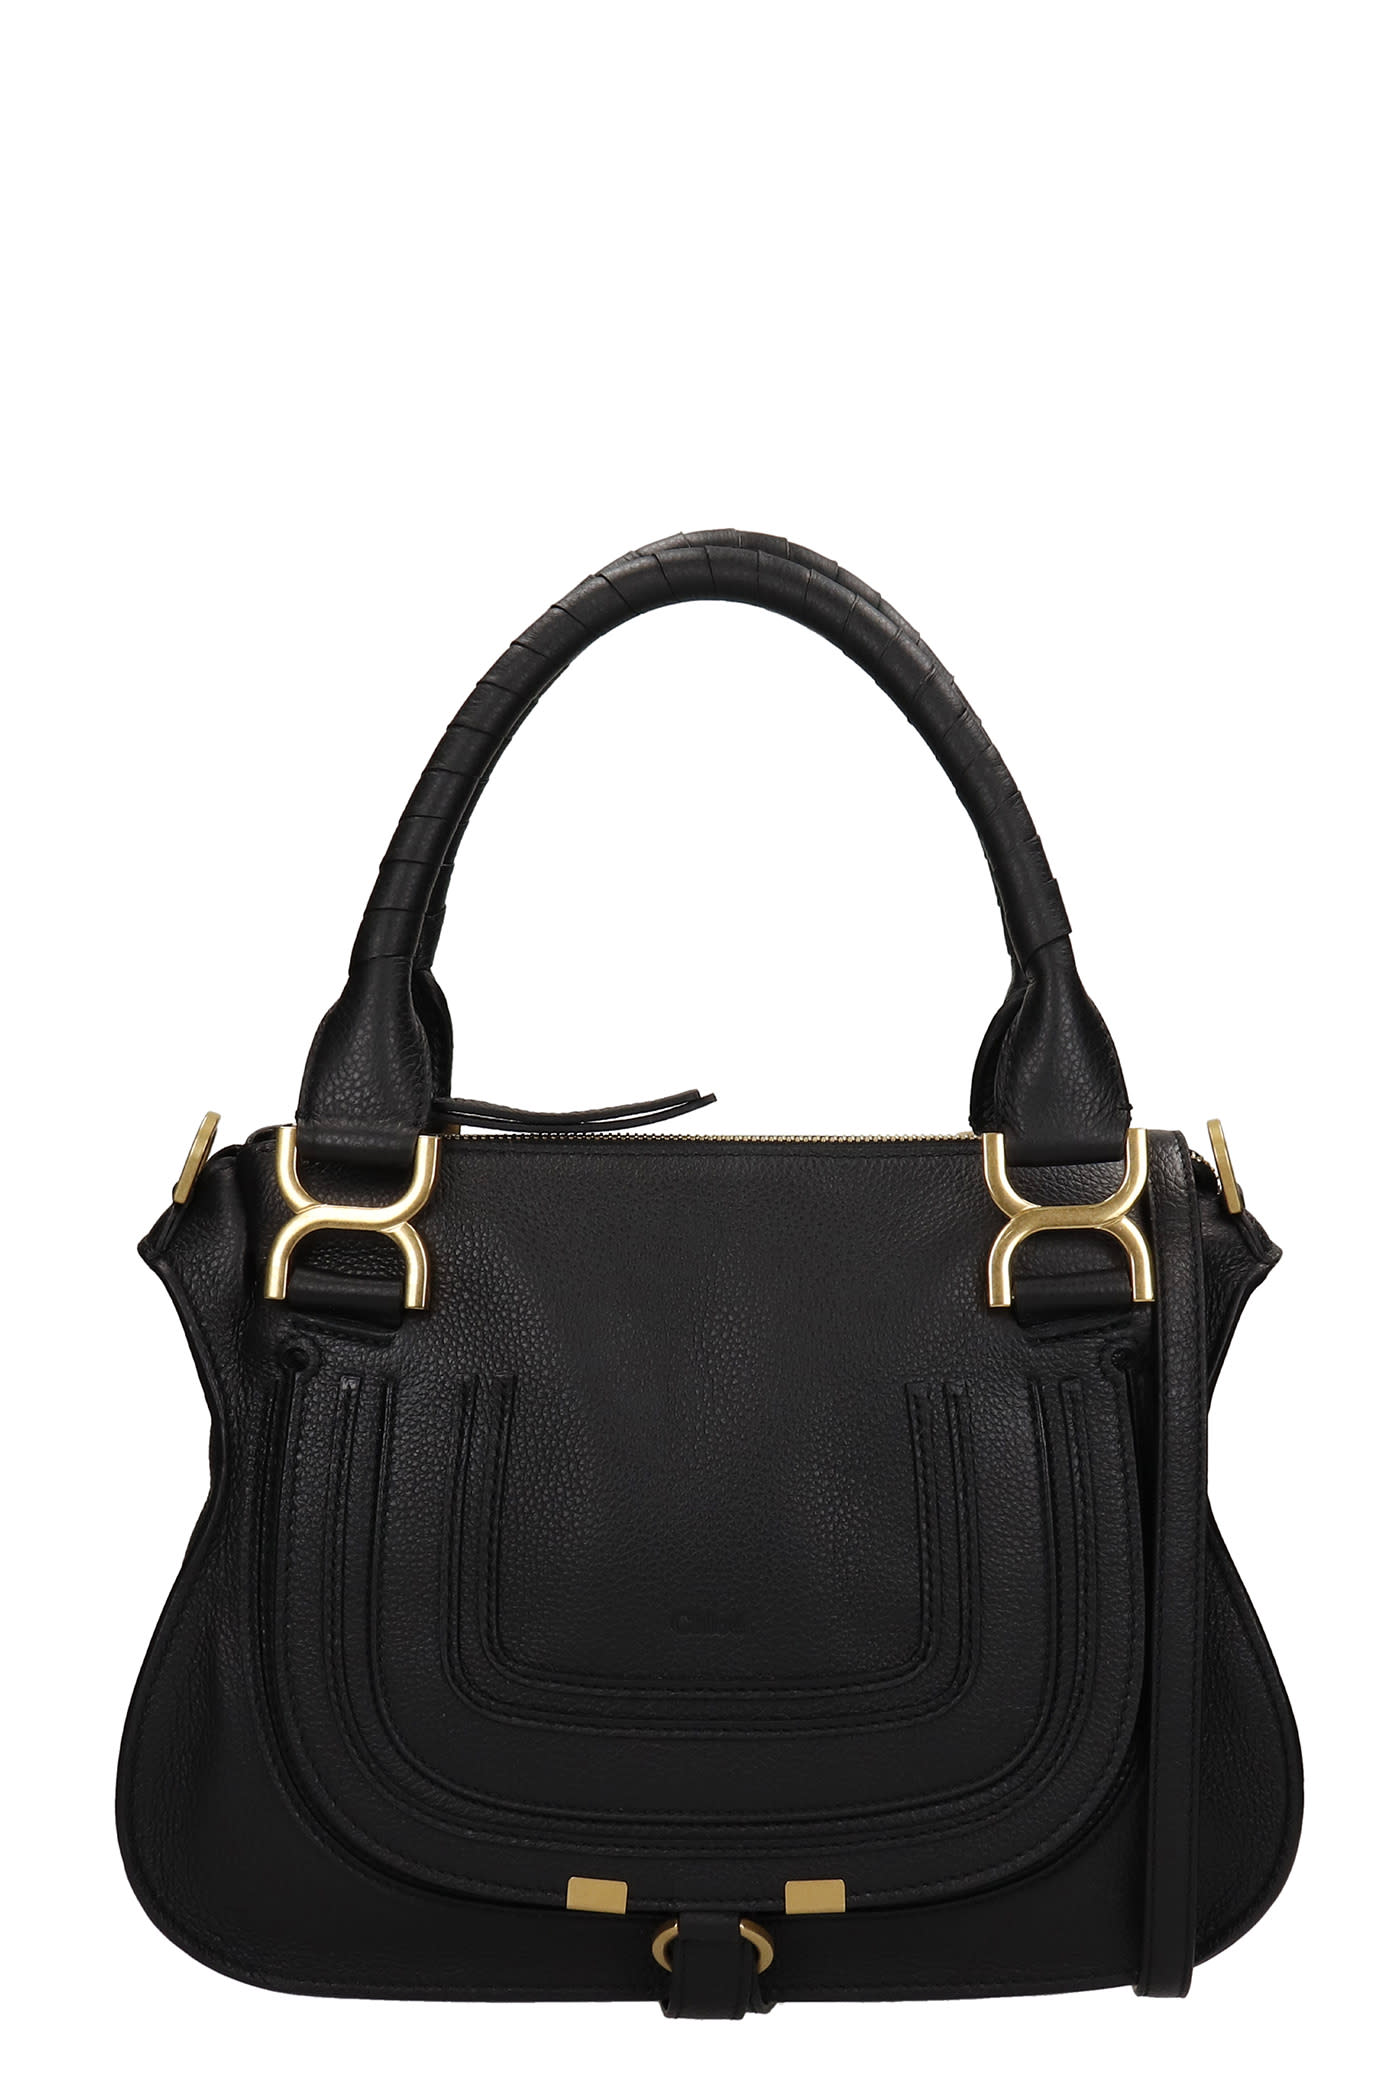 Chloé Marcie Hand Bag In Black Leather